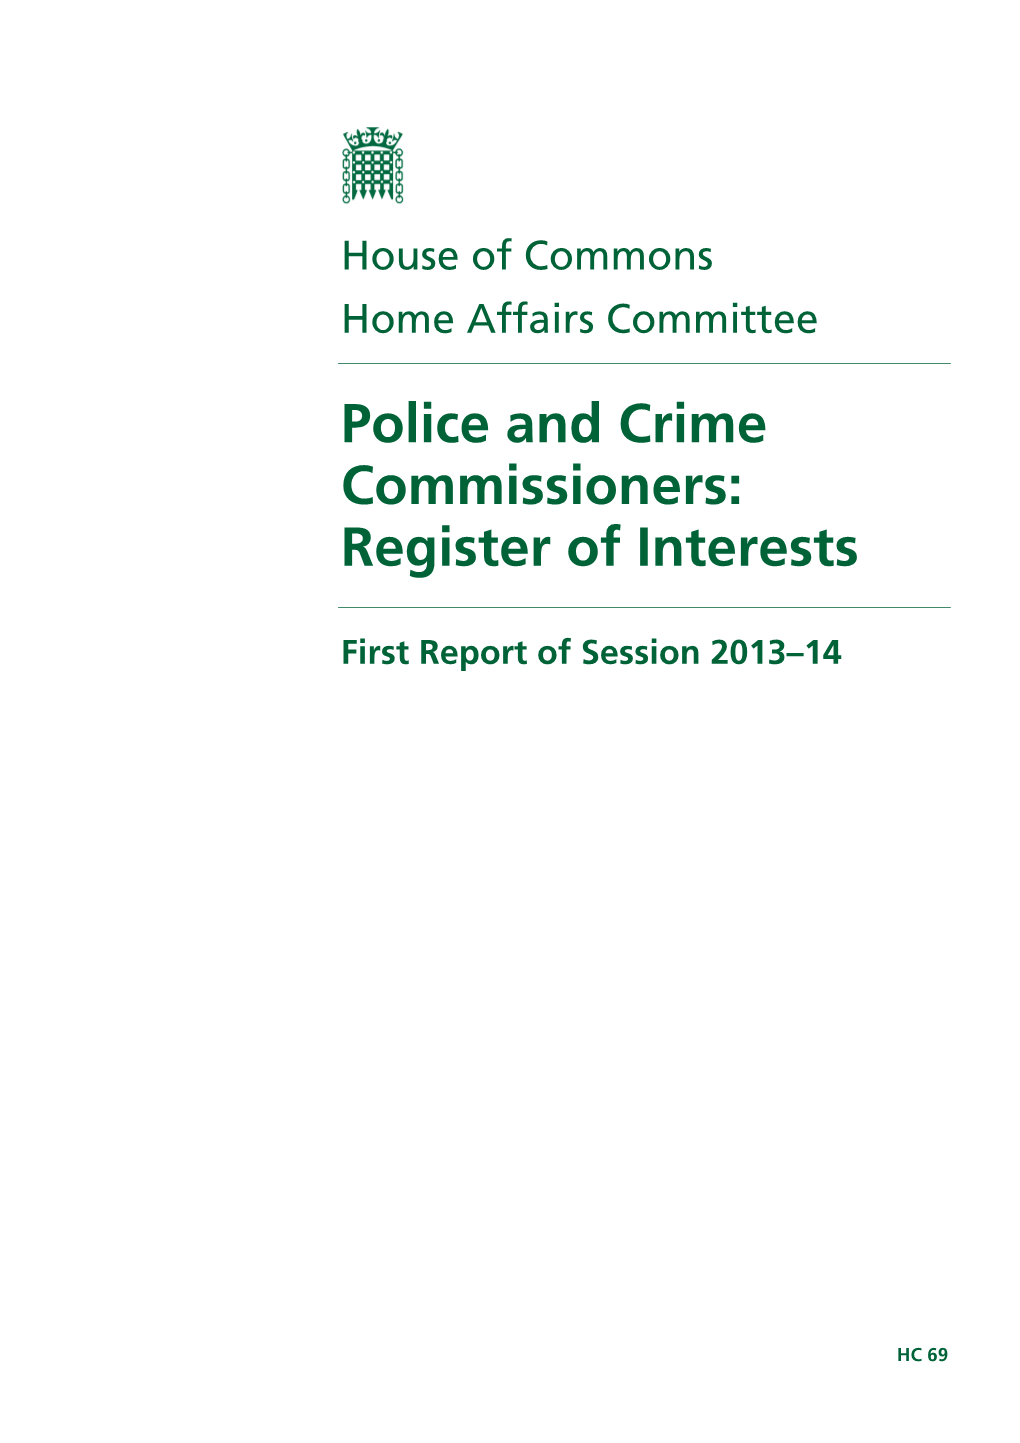 Police and Crime Commissioners: Register of Interests